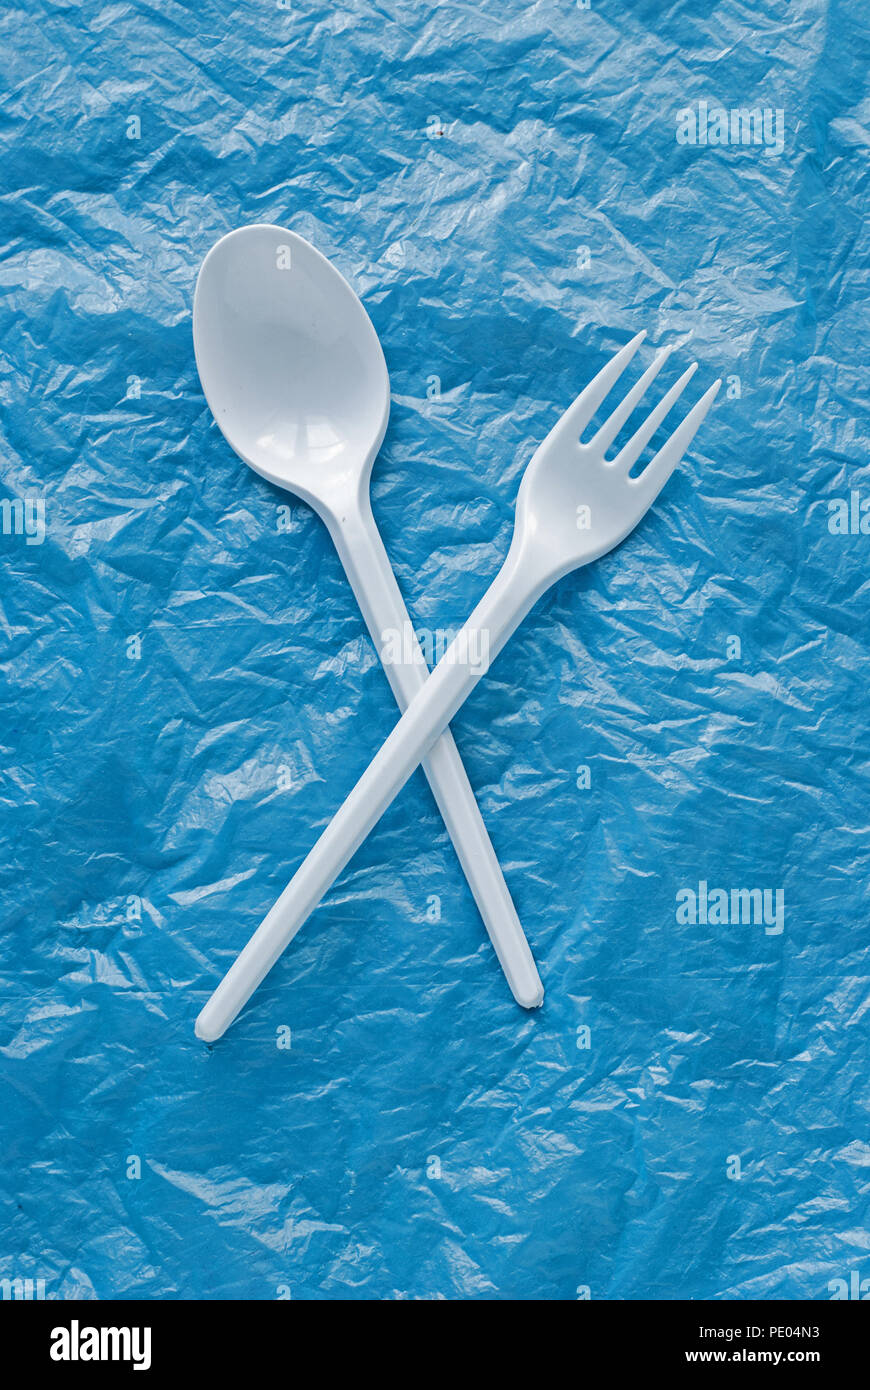 white plastic spoon and fork on a blue plastic bag Stock Photo